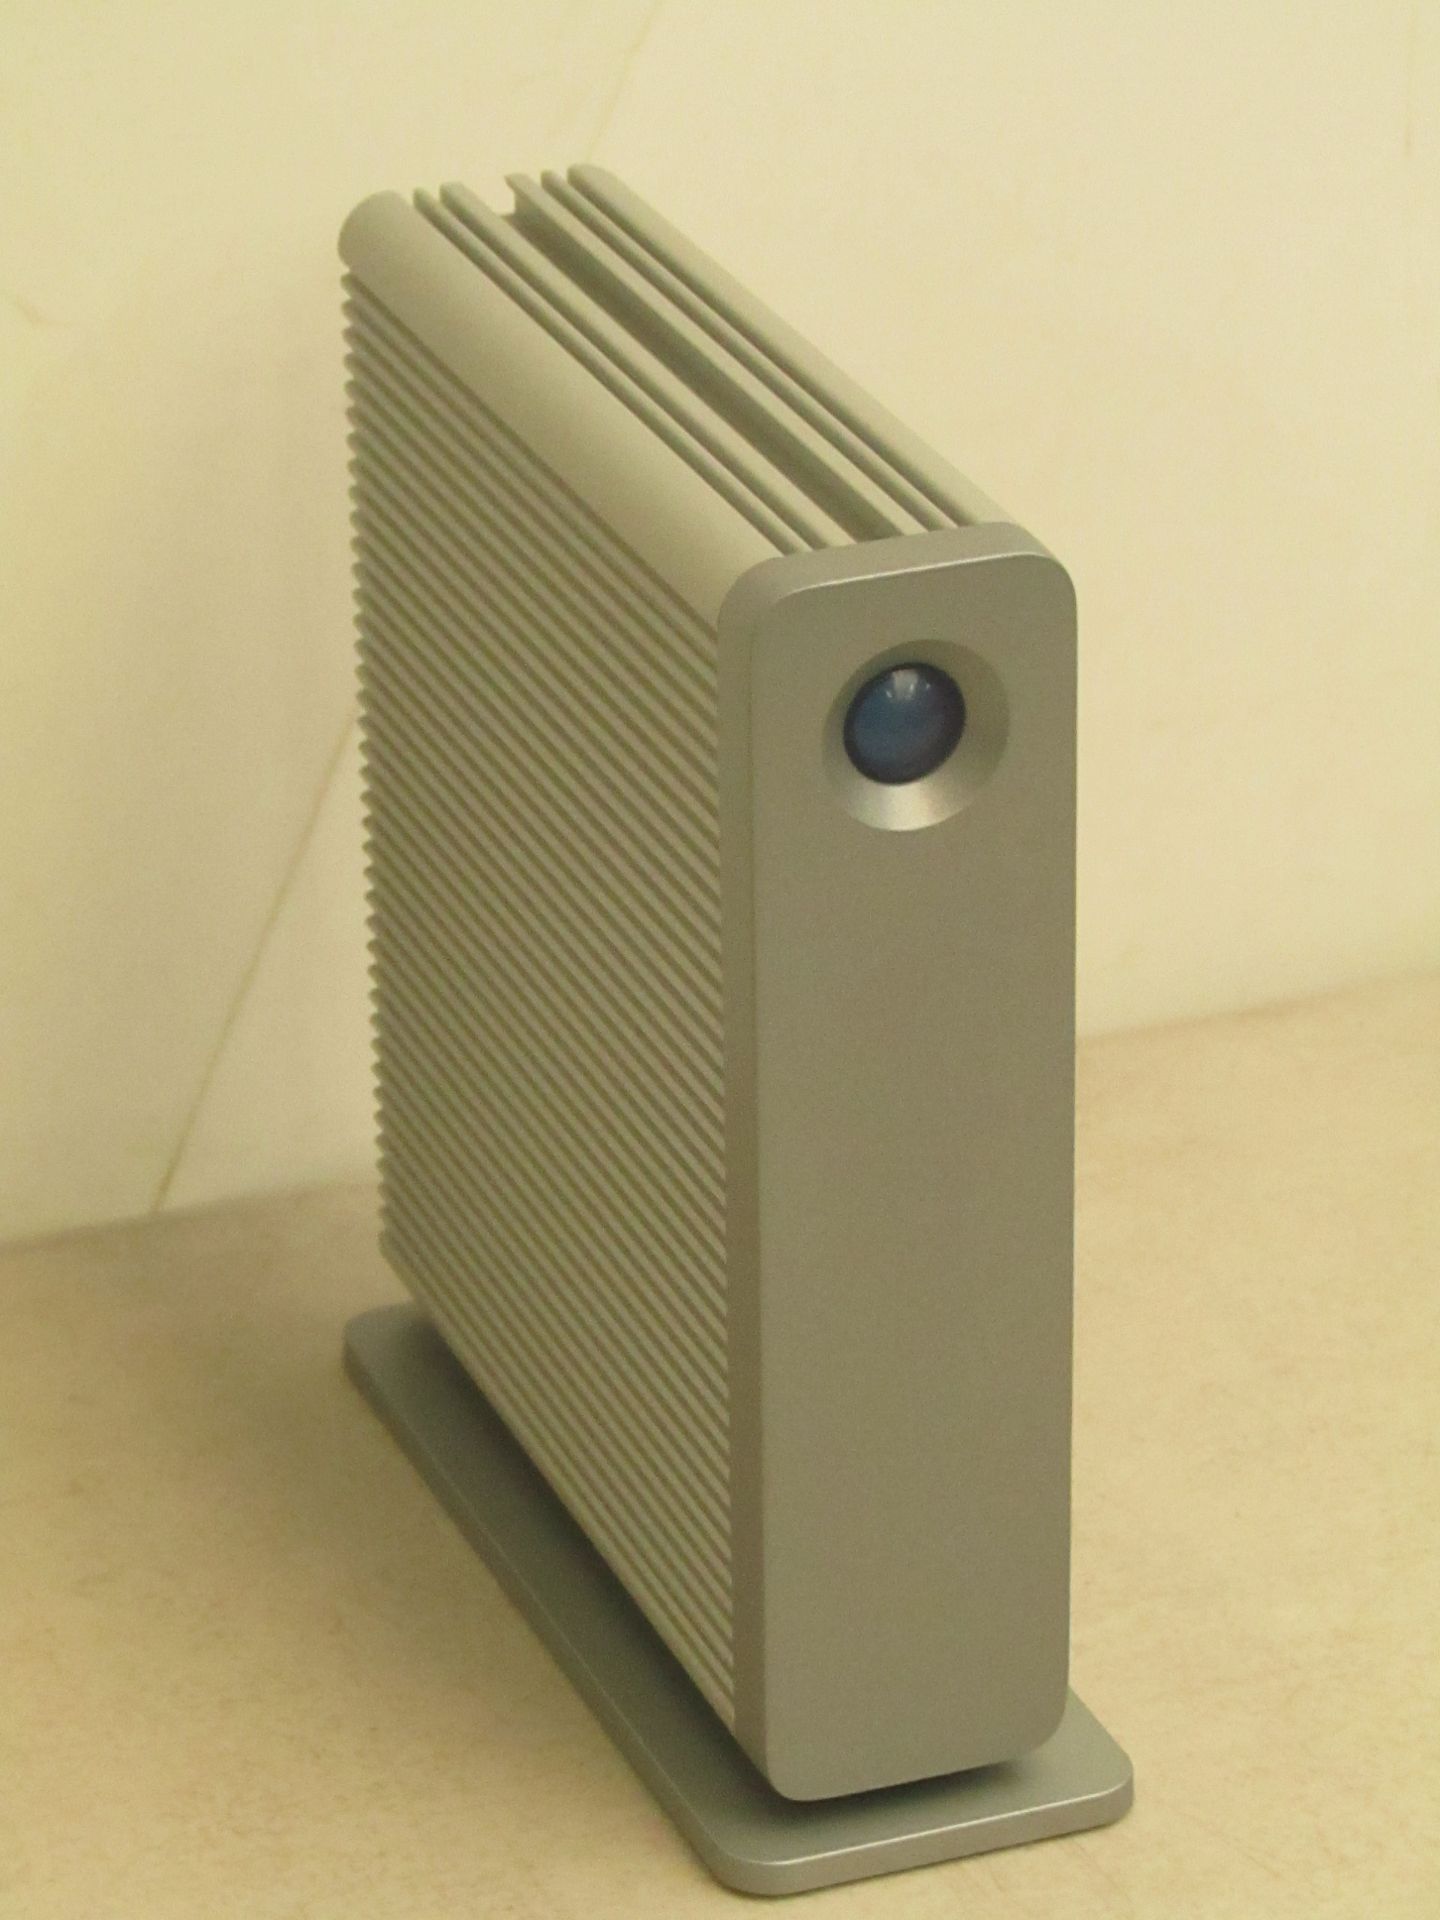 6x LaCie 3TB d2 Quadra external USB 3.0 firewall 800 eSATA hard drive, all are empty and only case. - Image 2 of 2